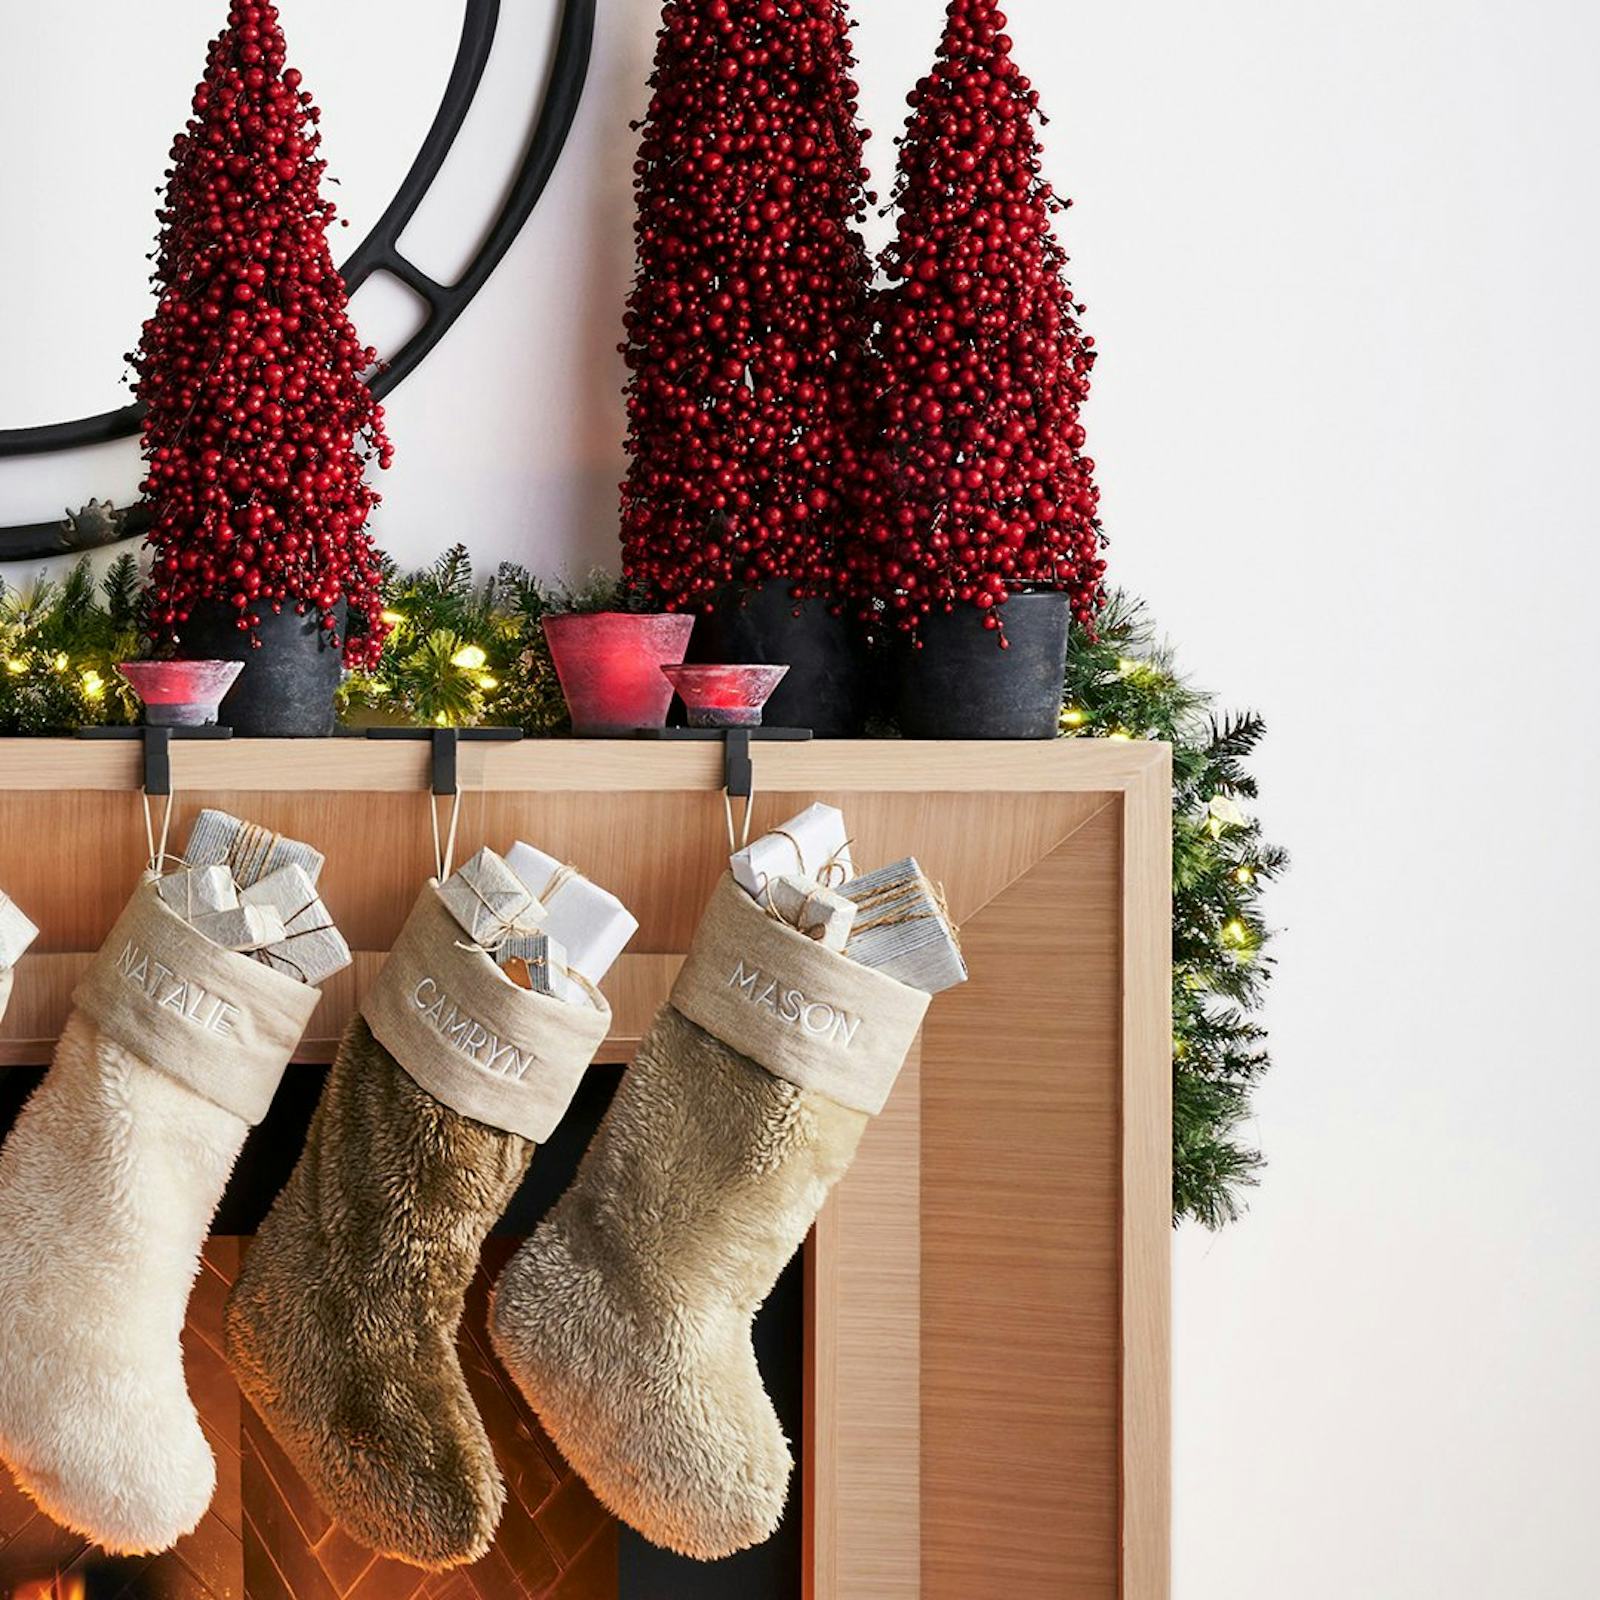 All Your Holiday Decorating Needs Are On Sale At Pottery Barn Right Now